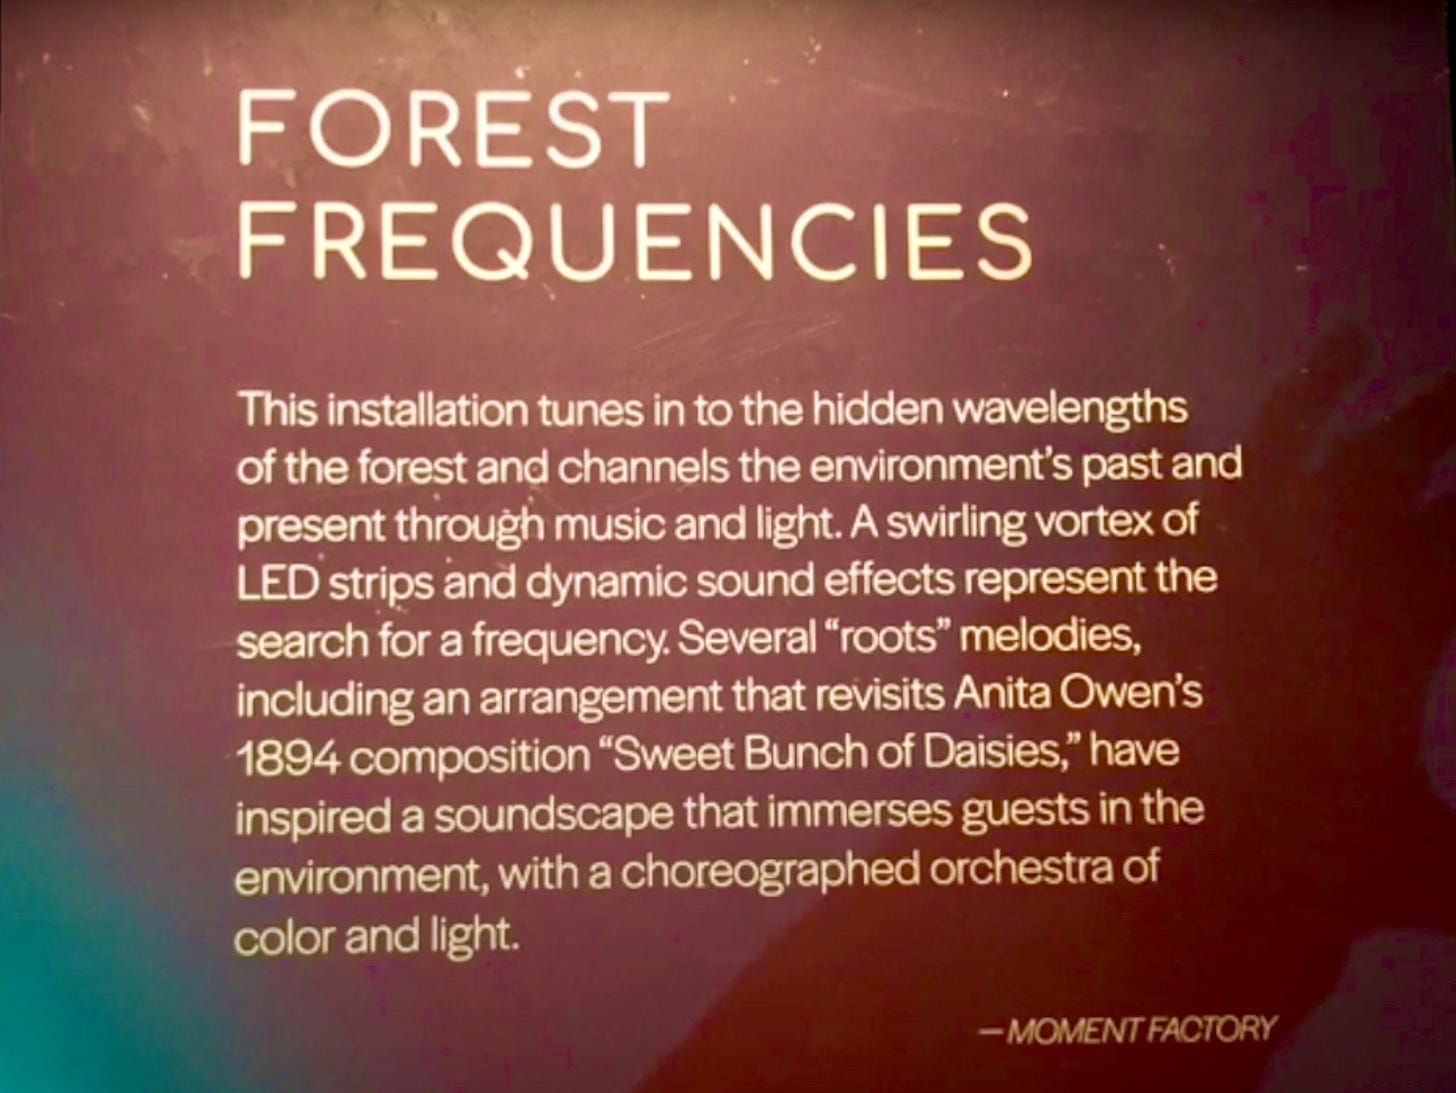 Forest Frequencies: This installation tunes in to the hidden wavelengths of the forest and channels the environment's past and present through music and light. A swirling vortex of LED strips and dynamic sound effects represent the search for a frequency. Several "roots" melodies, including an arrangement that revisits Anita Owen's 1894 composition "Sweet Bunch of Daisies," have inspired a soundscape that immerses guests in the environment, with a choreographed orchestra of color and light. Moment Factory